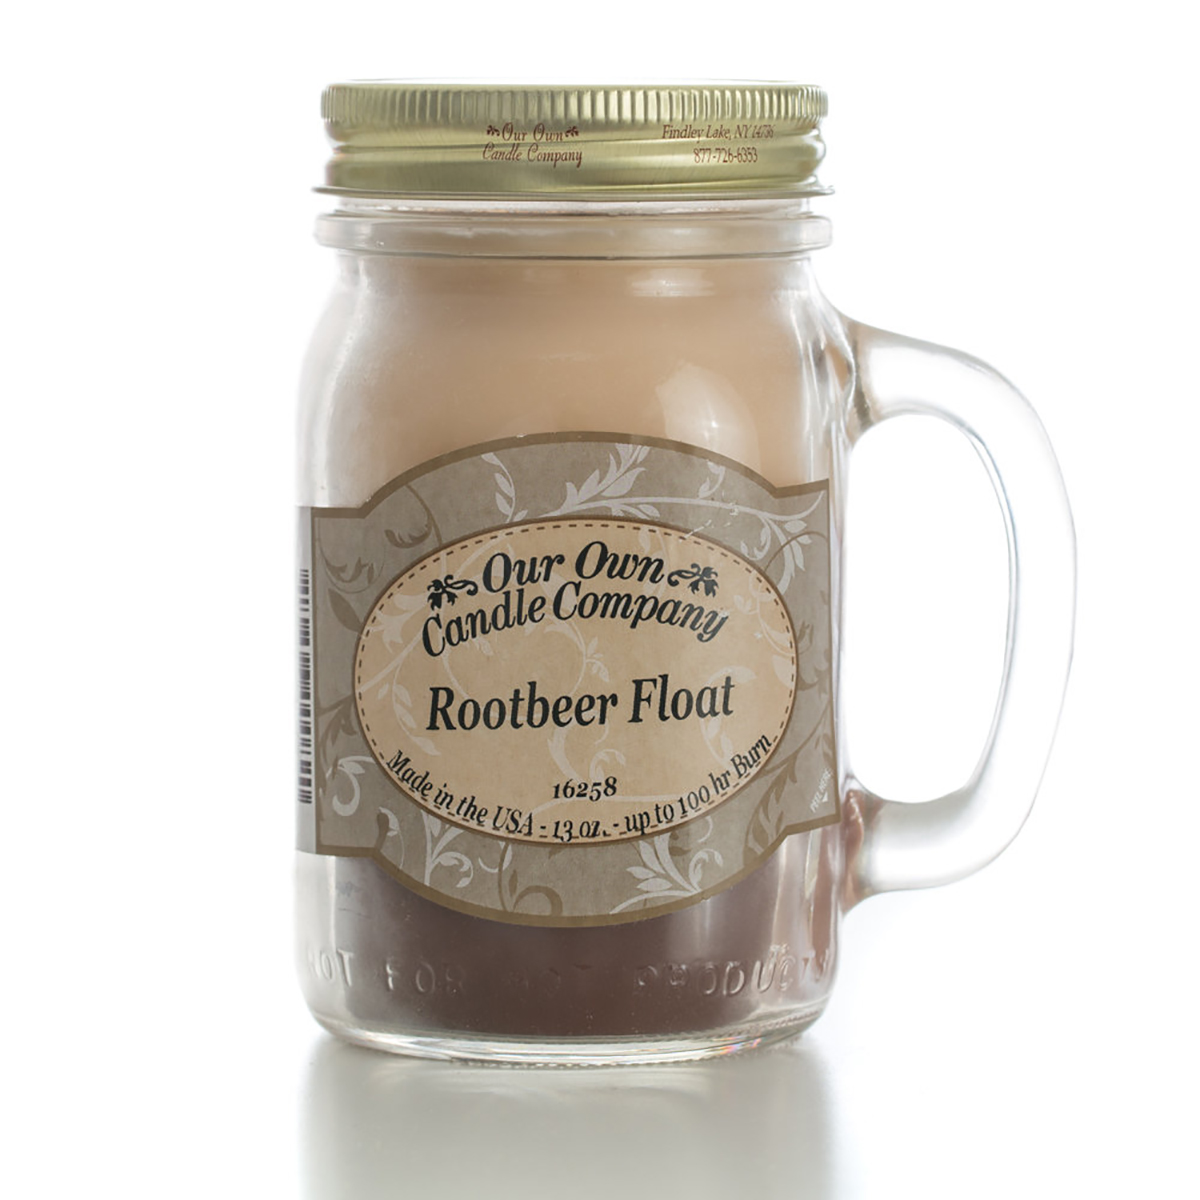 Our Own Candle Company 13oz. Root Beer Float Jar Candle